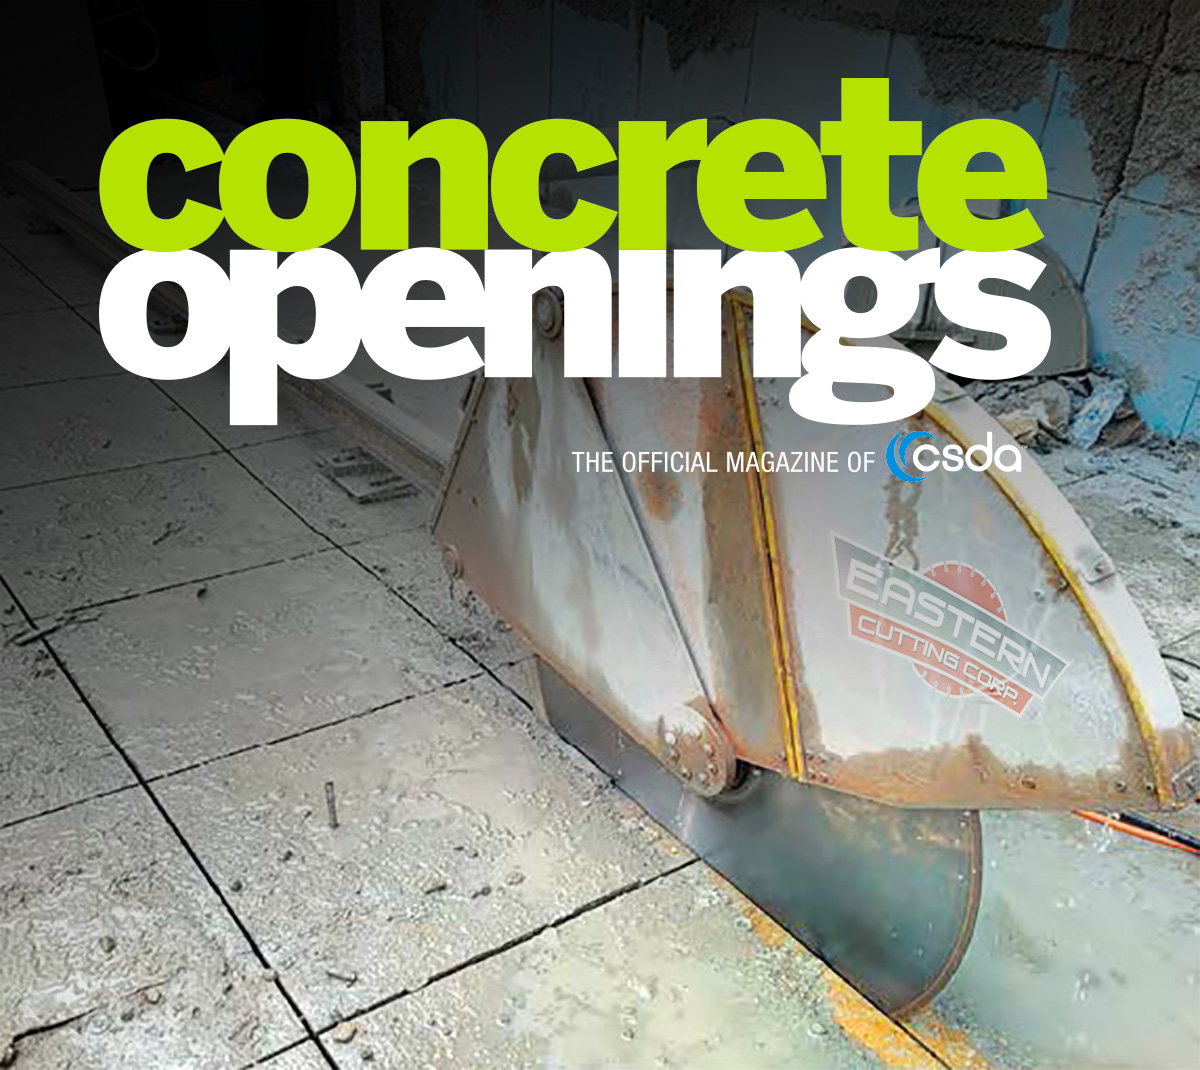 Eastern Cutting Featured in Concrete Openings: Wall Sawing & Demolition at the Javits Federal Building